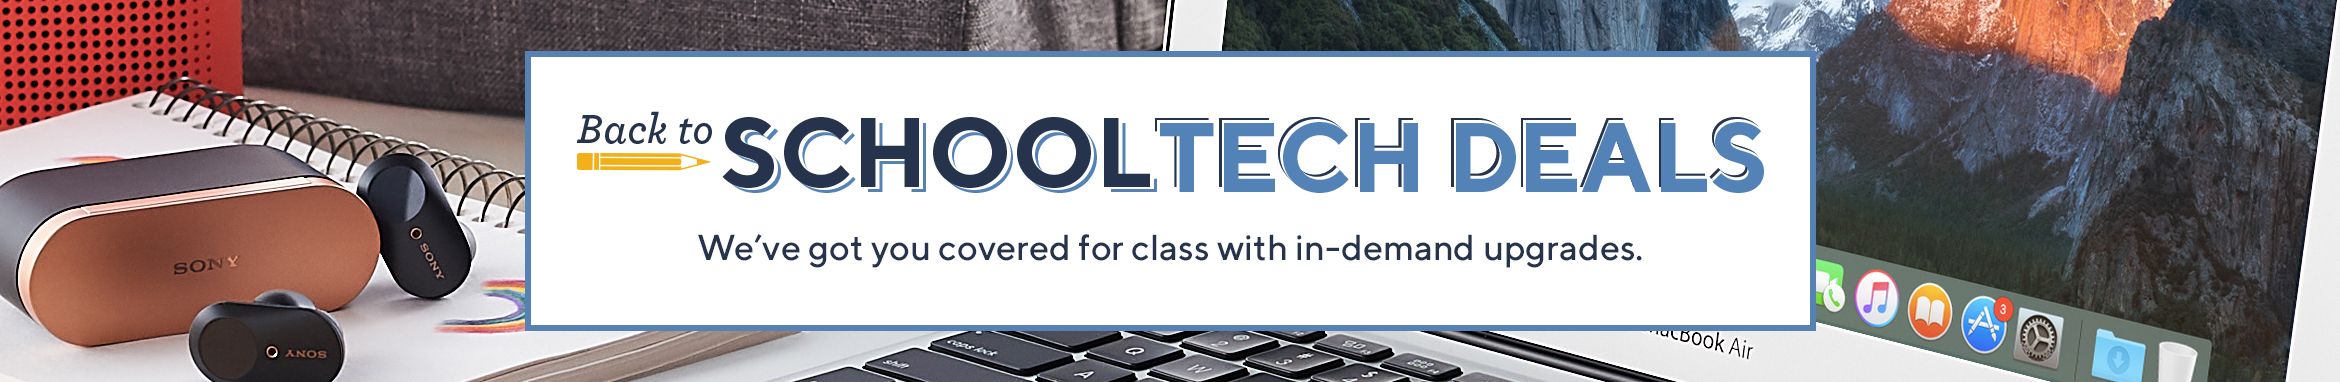 Back-to-School Tech Deals - We've got you covered for class with in-demand upgrades.  